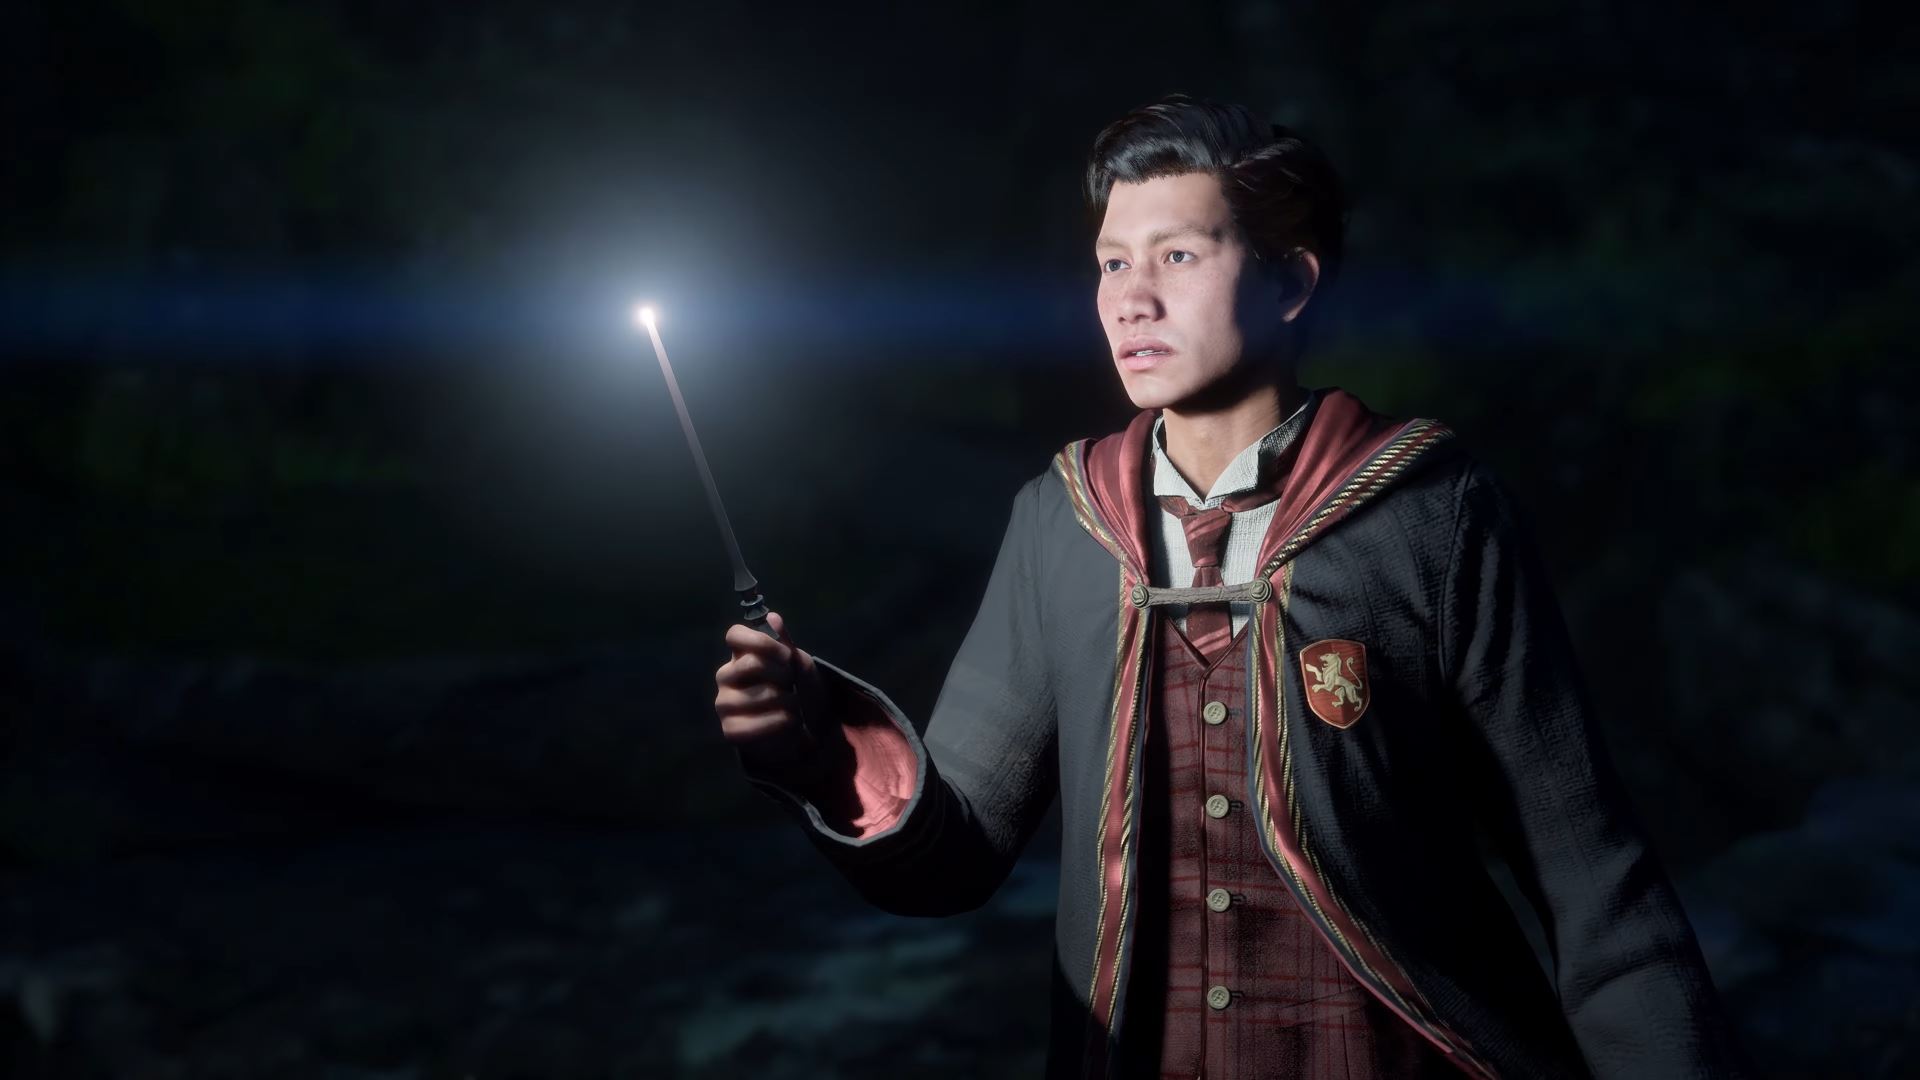 Hogwarts Legacy Looks Like Another Magical PS5, PS4 Open World